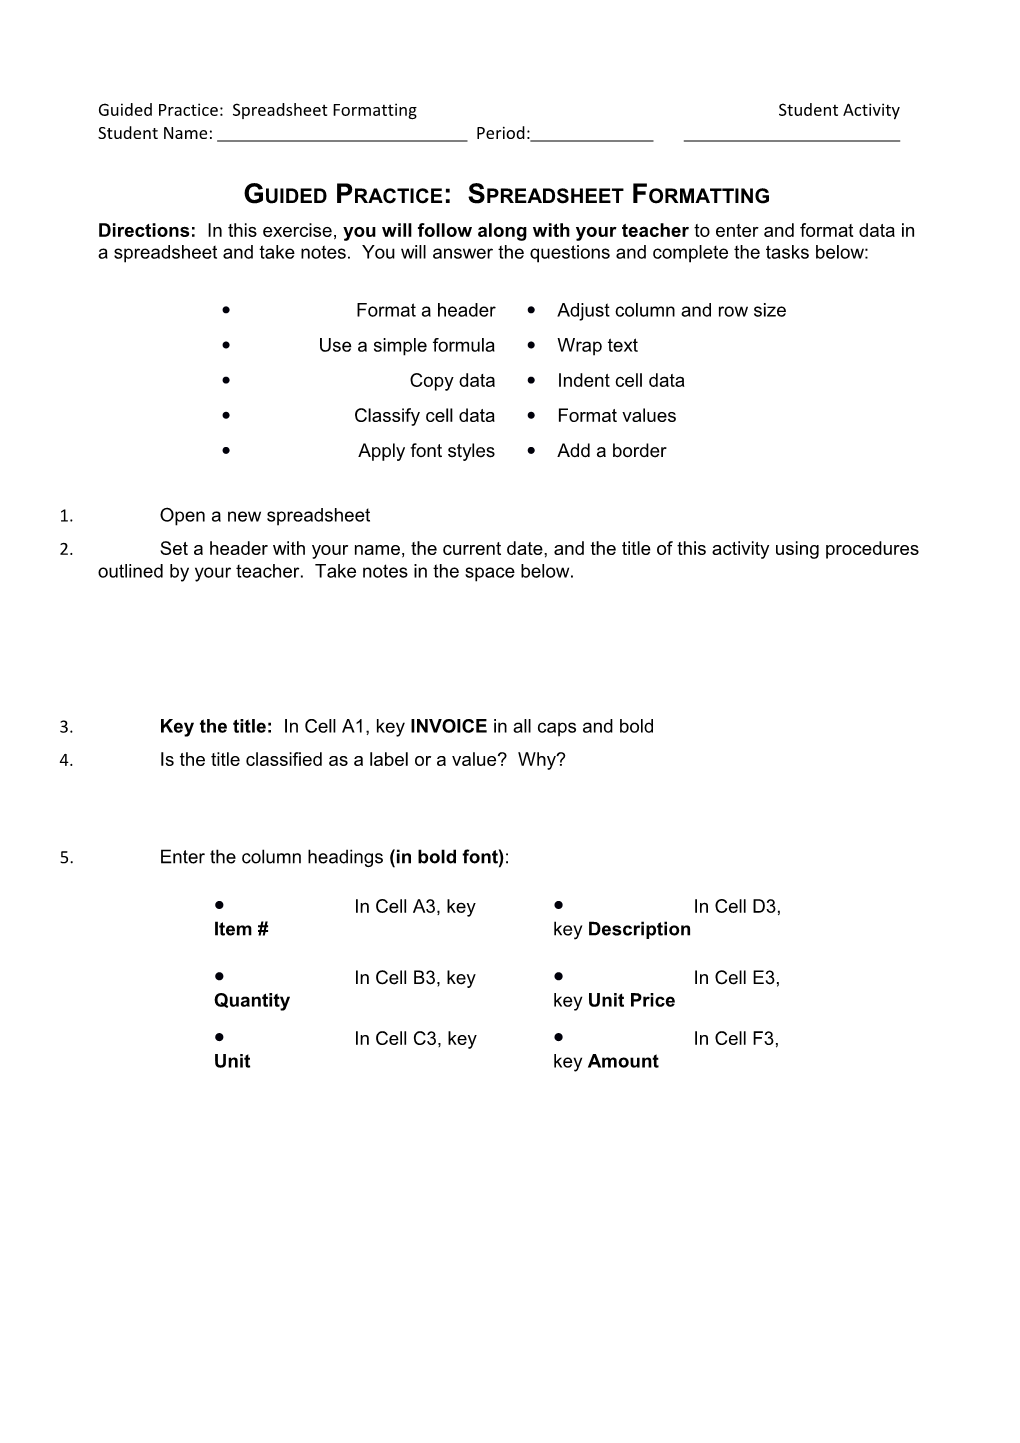 Guided Practice: Spreadsheet Formatting Student Activity